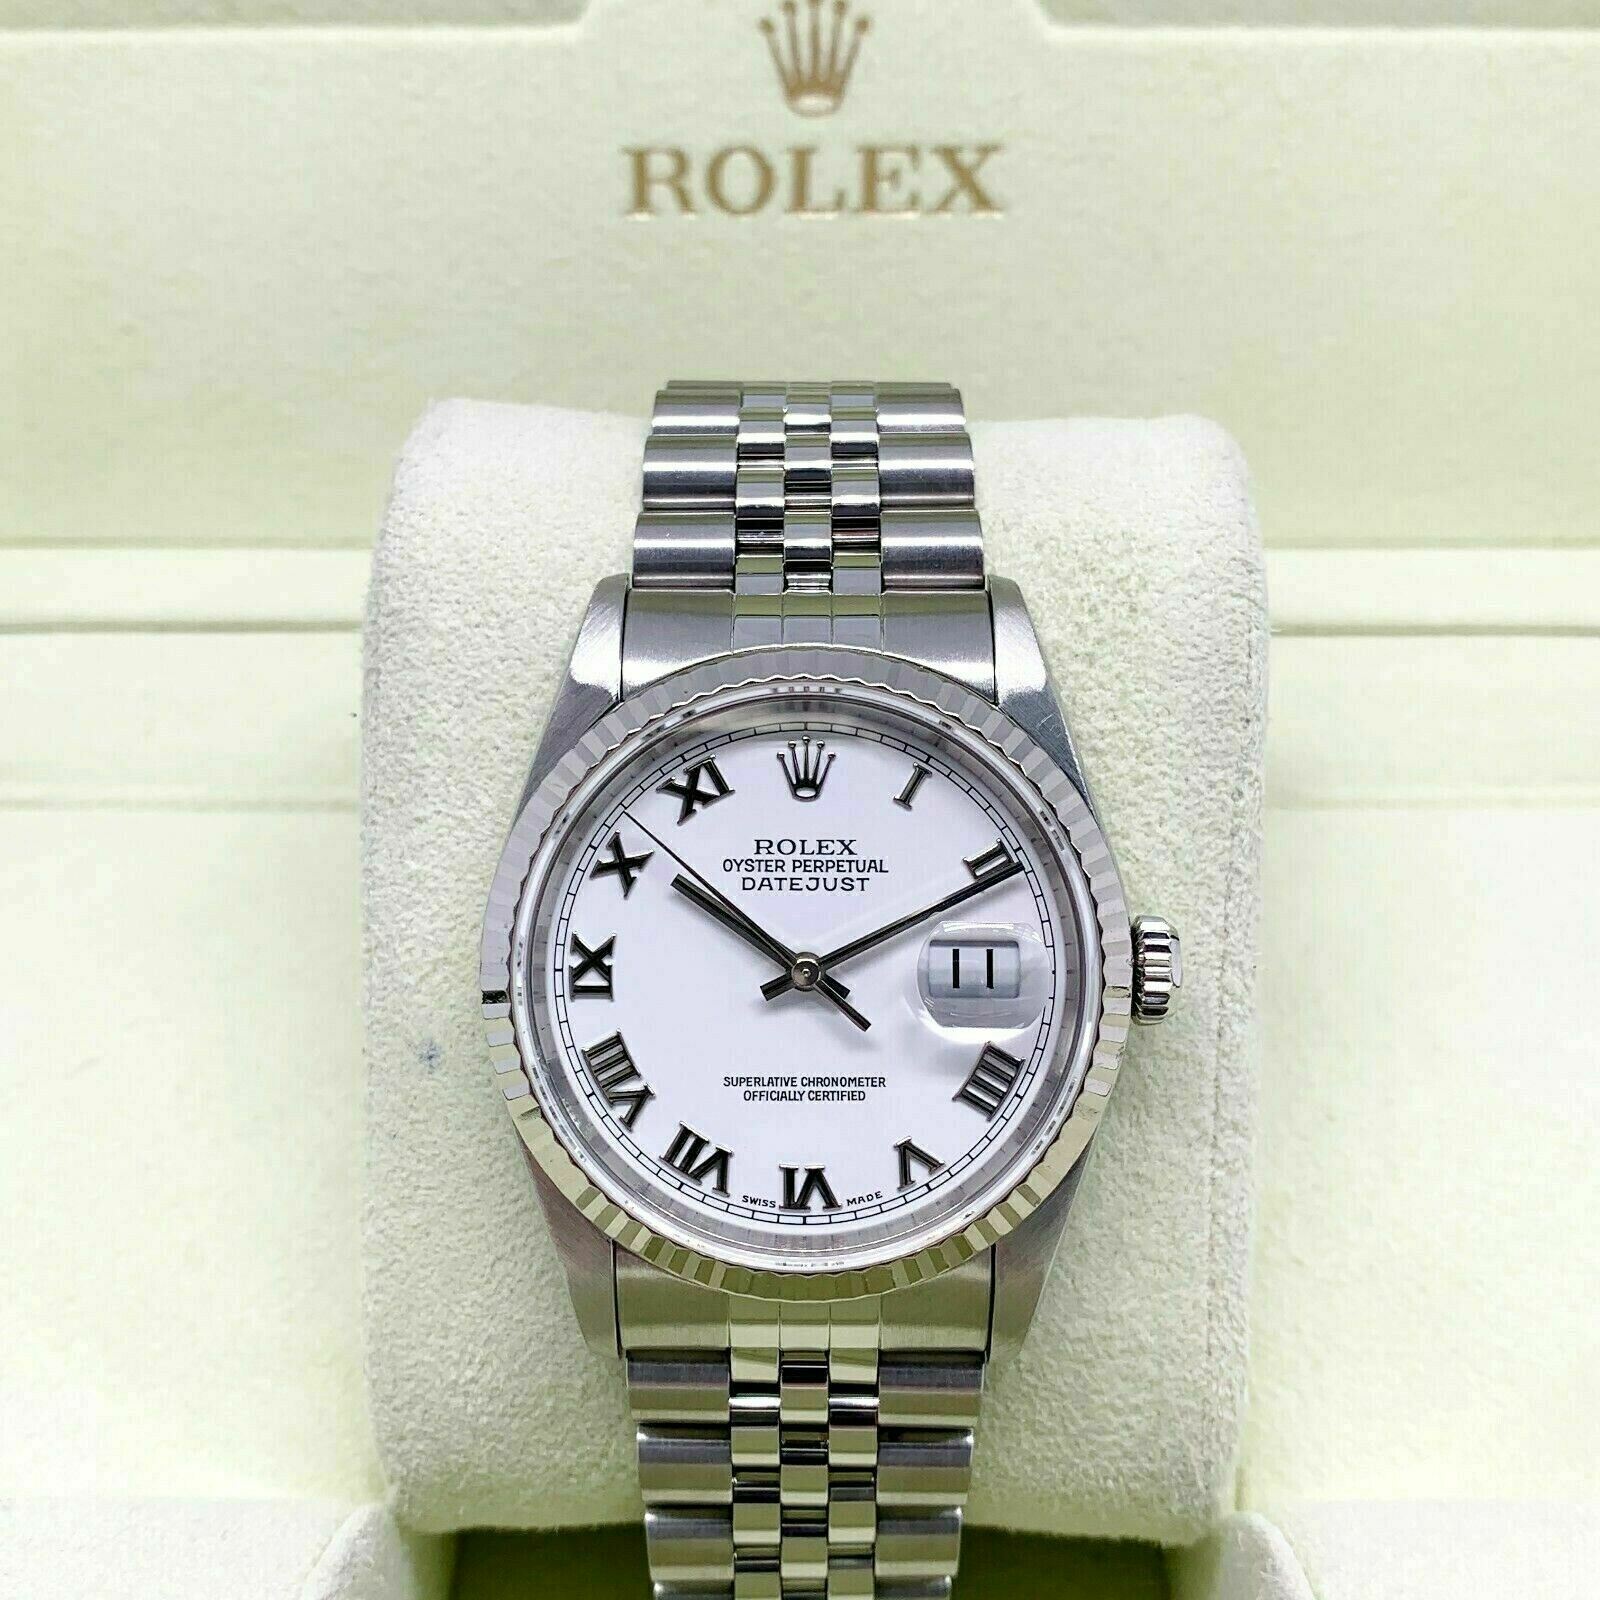 Rolex 36MM Jubilee Datejust Watch 18K Gold/Stainless Ref # 16234 Factory Dial